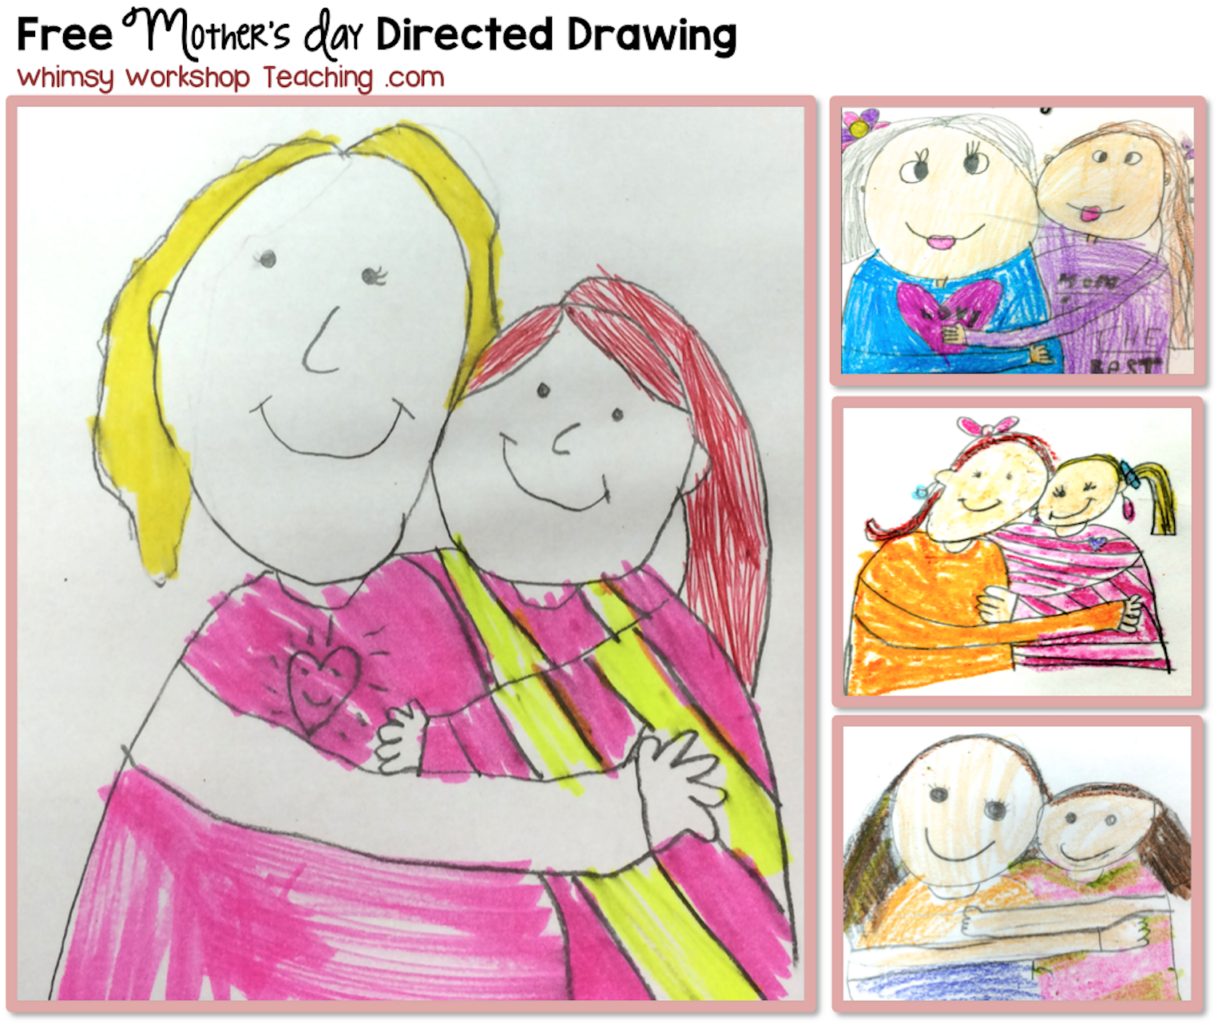 FREE Mother's Day Directed Drawing with differentiated writing pag...